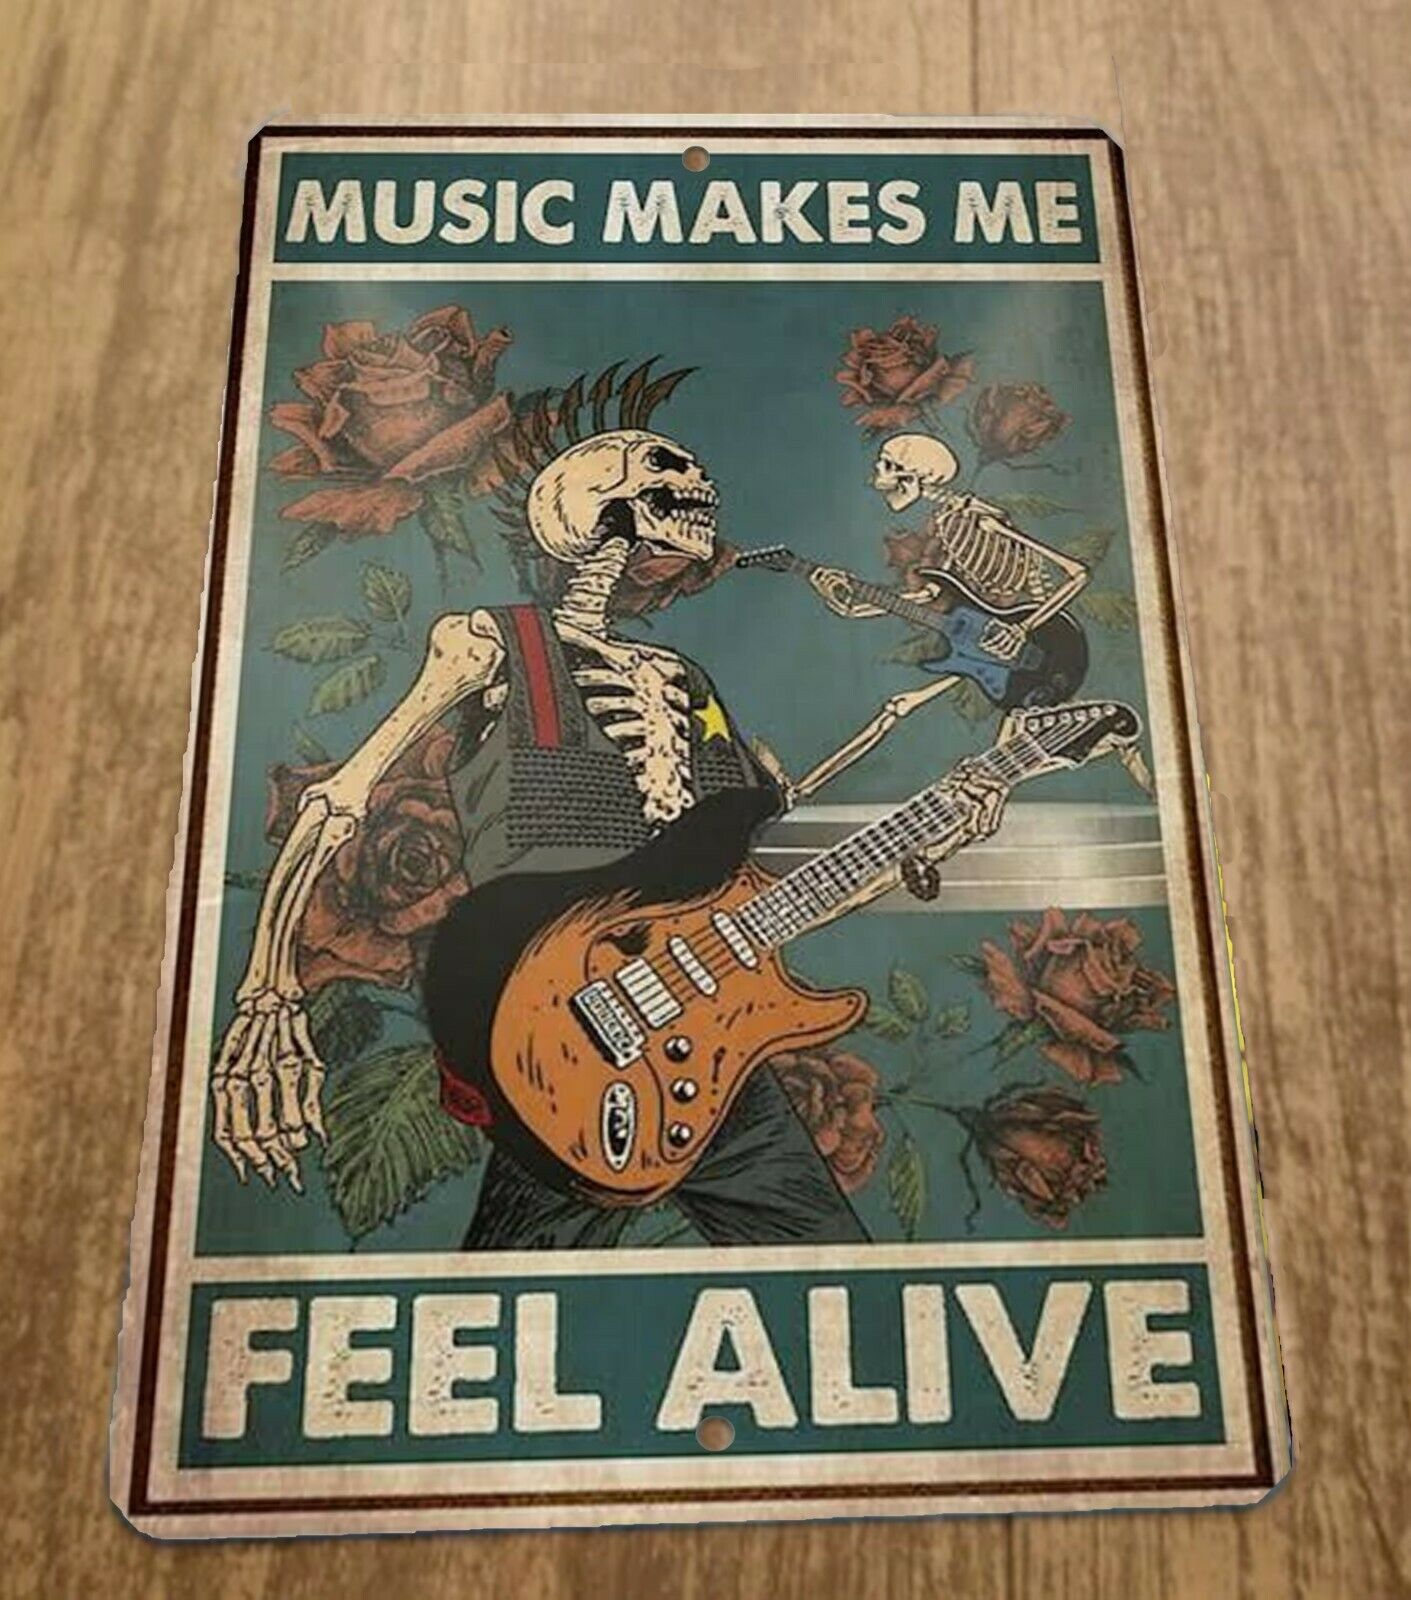 Music Makes Me Feel Alive Punk Rock Skeletons 8x12 Metal Wall Sign Misc Poster